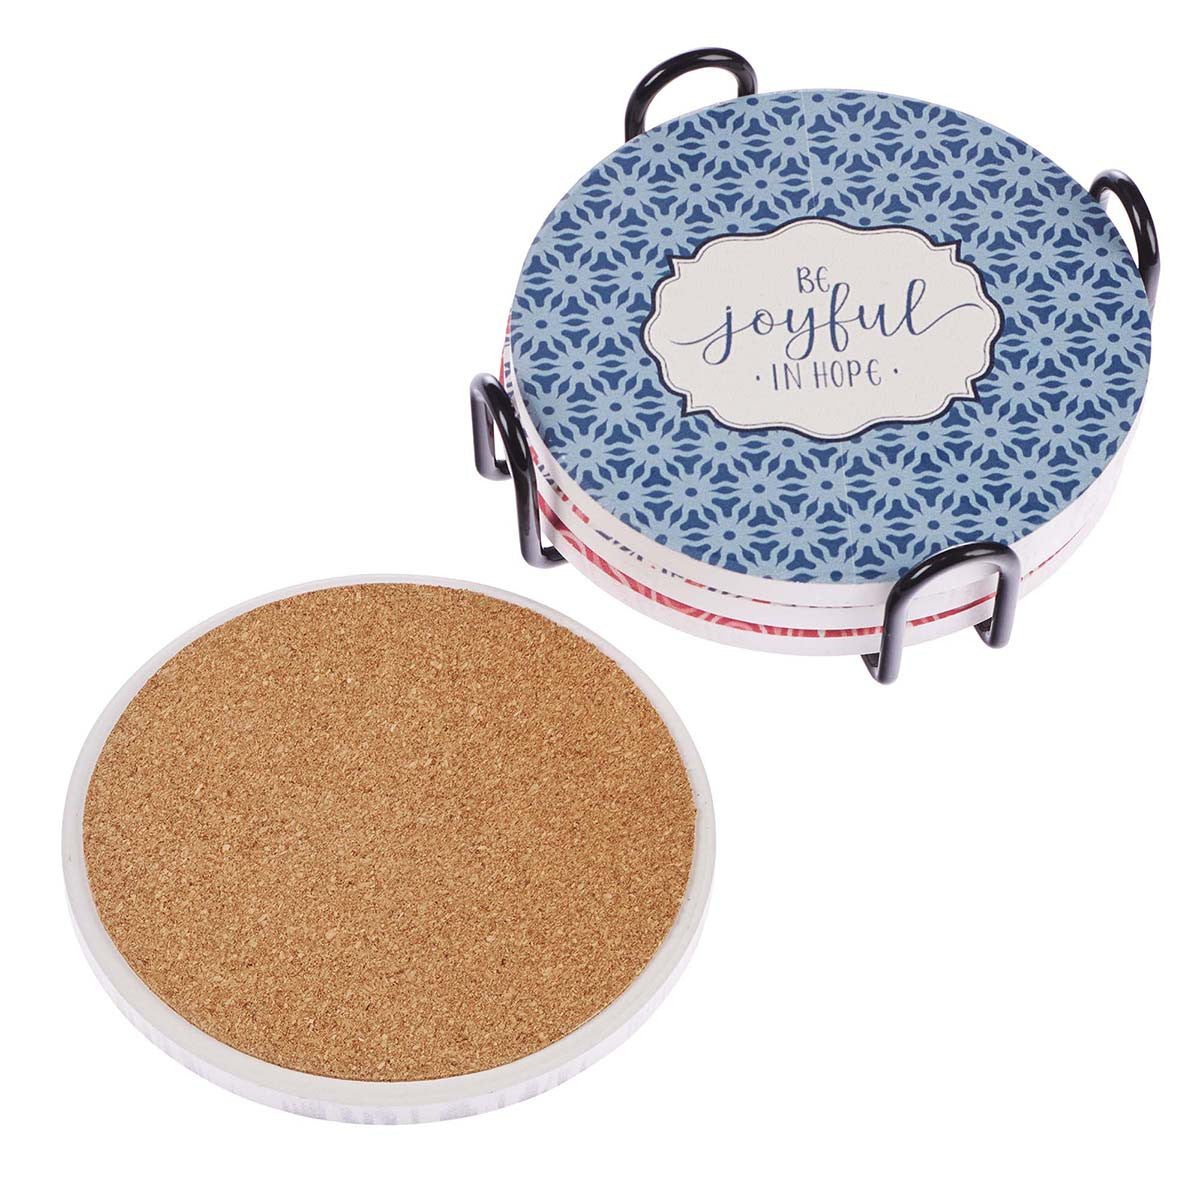 Image of Four-piece Assorted Pattern Ceramic Coaster Set other